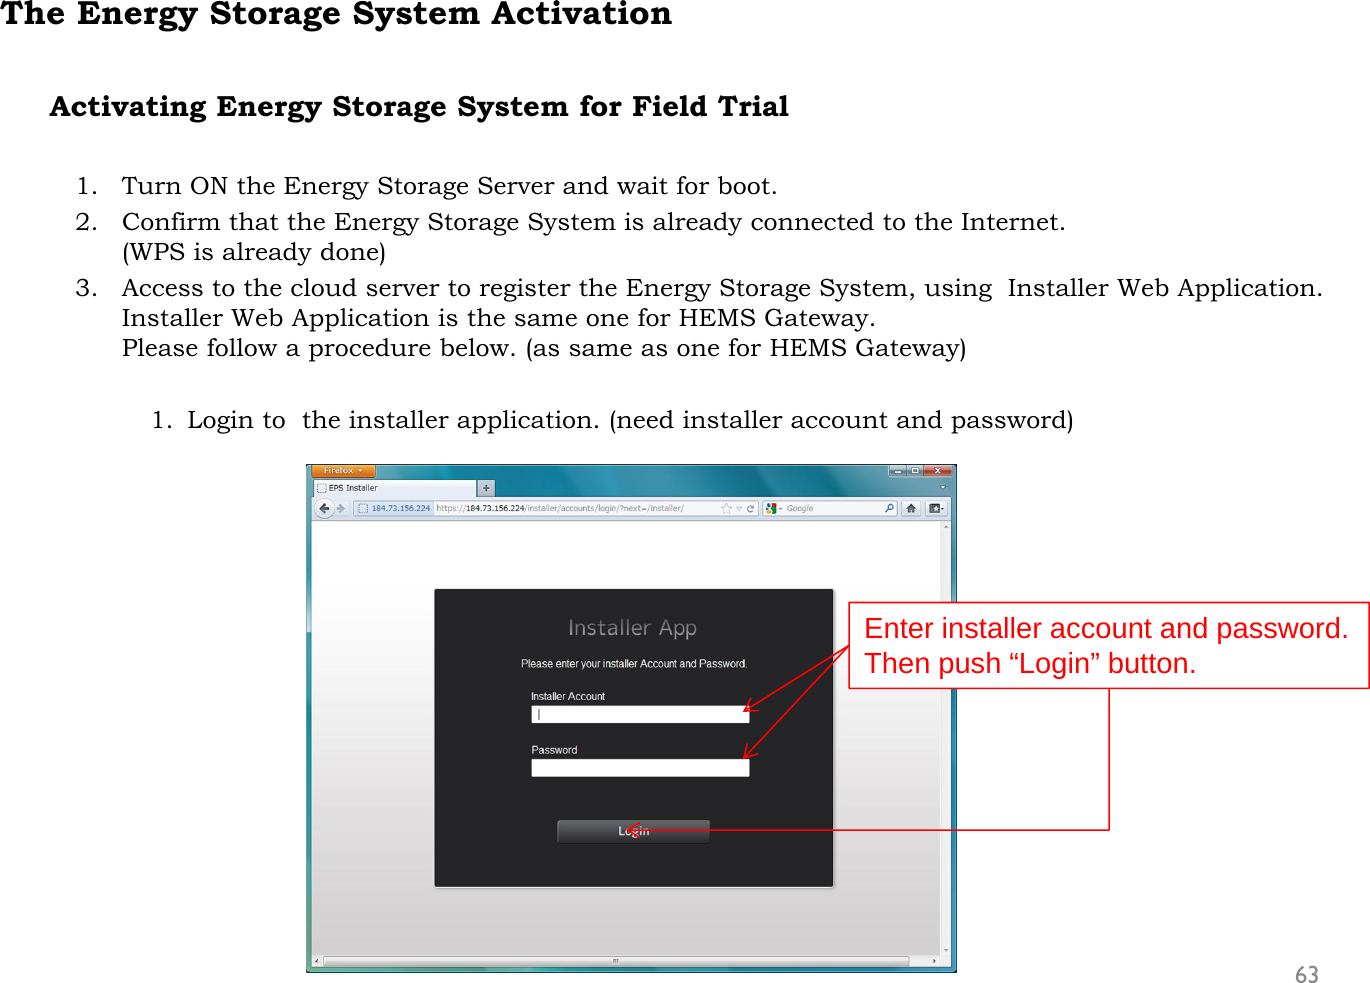 The Energy Storage System ActivationActivating Energy Storage System for Field Trial1. Turn ON the Energy Storage Server and wait for boot.2. Confirm that the Energy Storage System is already connected to the Internet. (WPS is already done)3. Access to the cloud server to register the Energy Storage System, using  Installer Web Application.Installer Web Application is the same one for HEMS Gateway.Please follow a procedure below. (as same as one for HEMS Gateway)1. Login to  the installer application. (need installer account and password)63Enter installer account and password.Then push “Login” button.